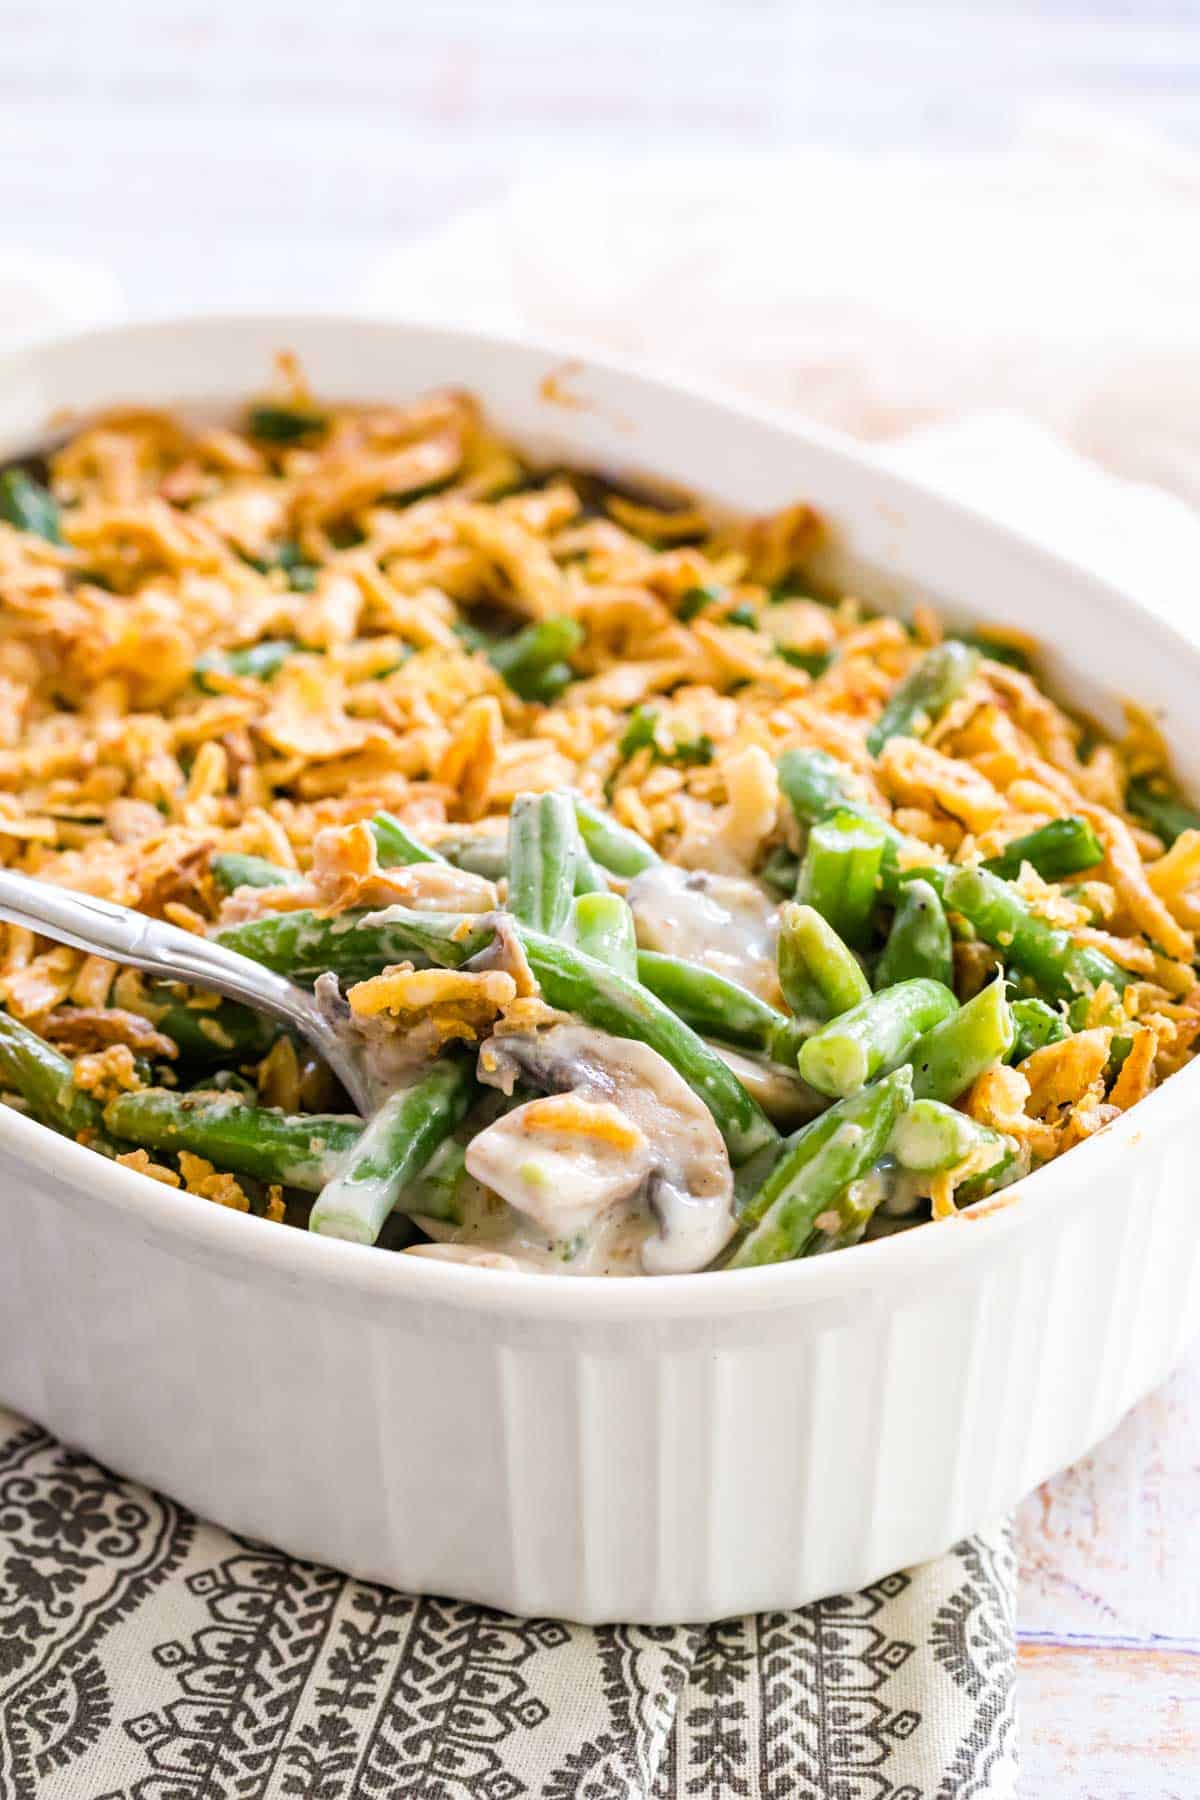 Gluten-free green bean casserole in a large white baking dish with a serving spoon.